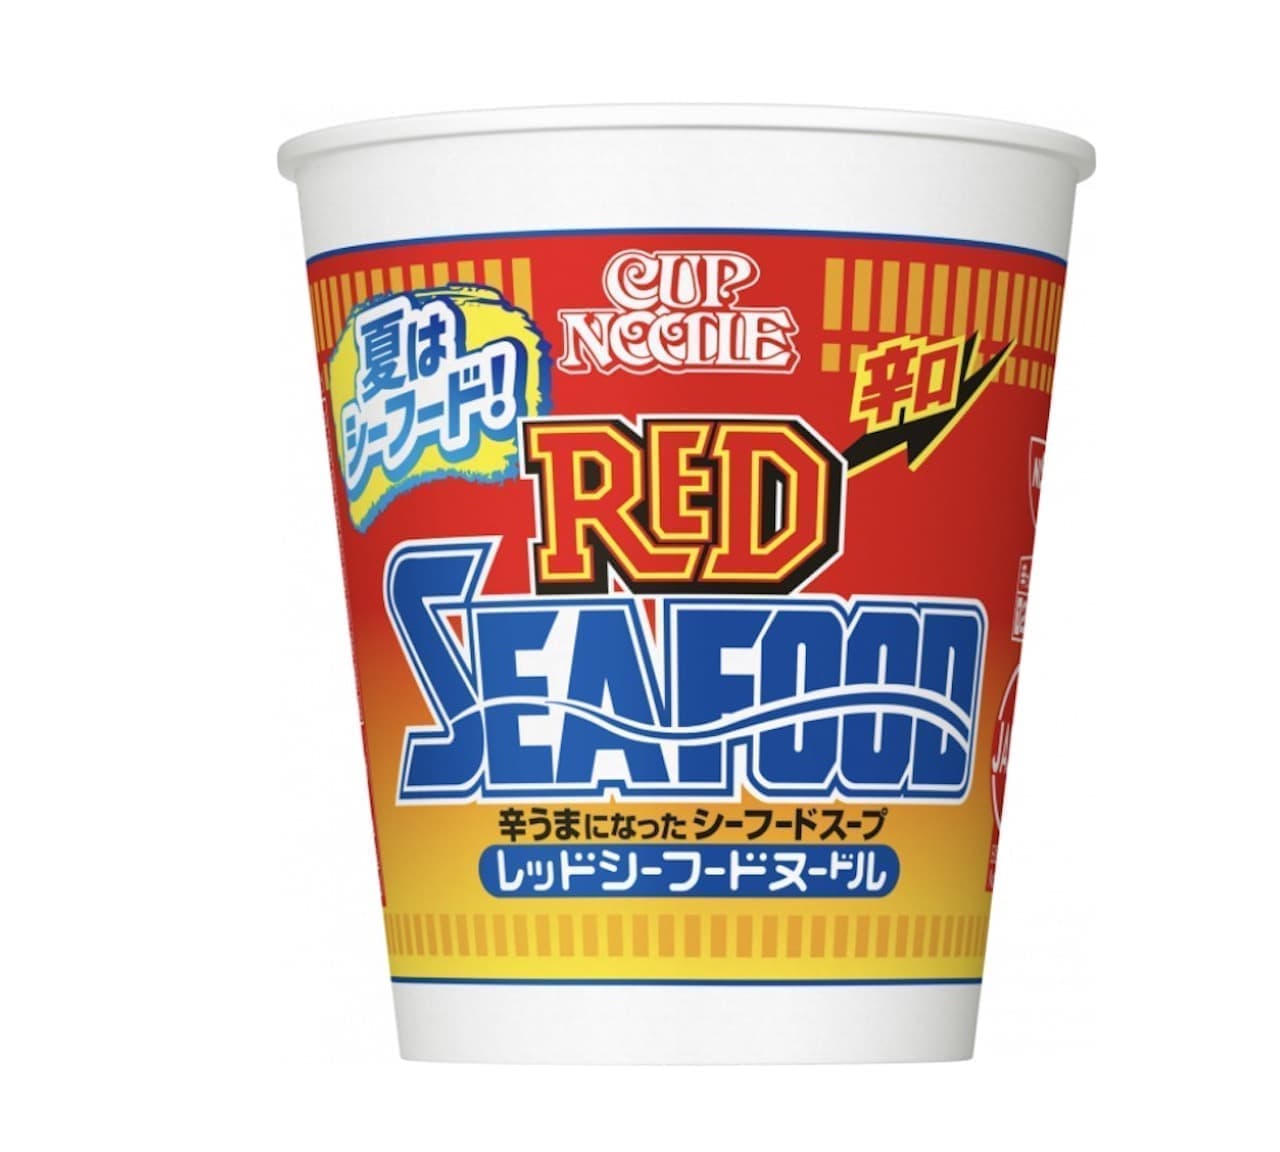 Nissin "Cup Noodle Red Seafood Noodle